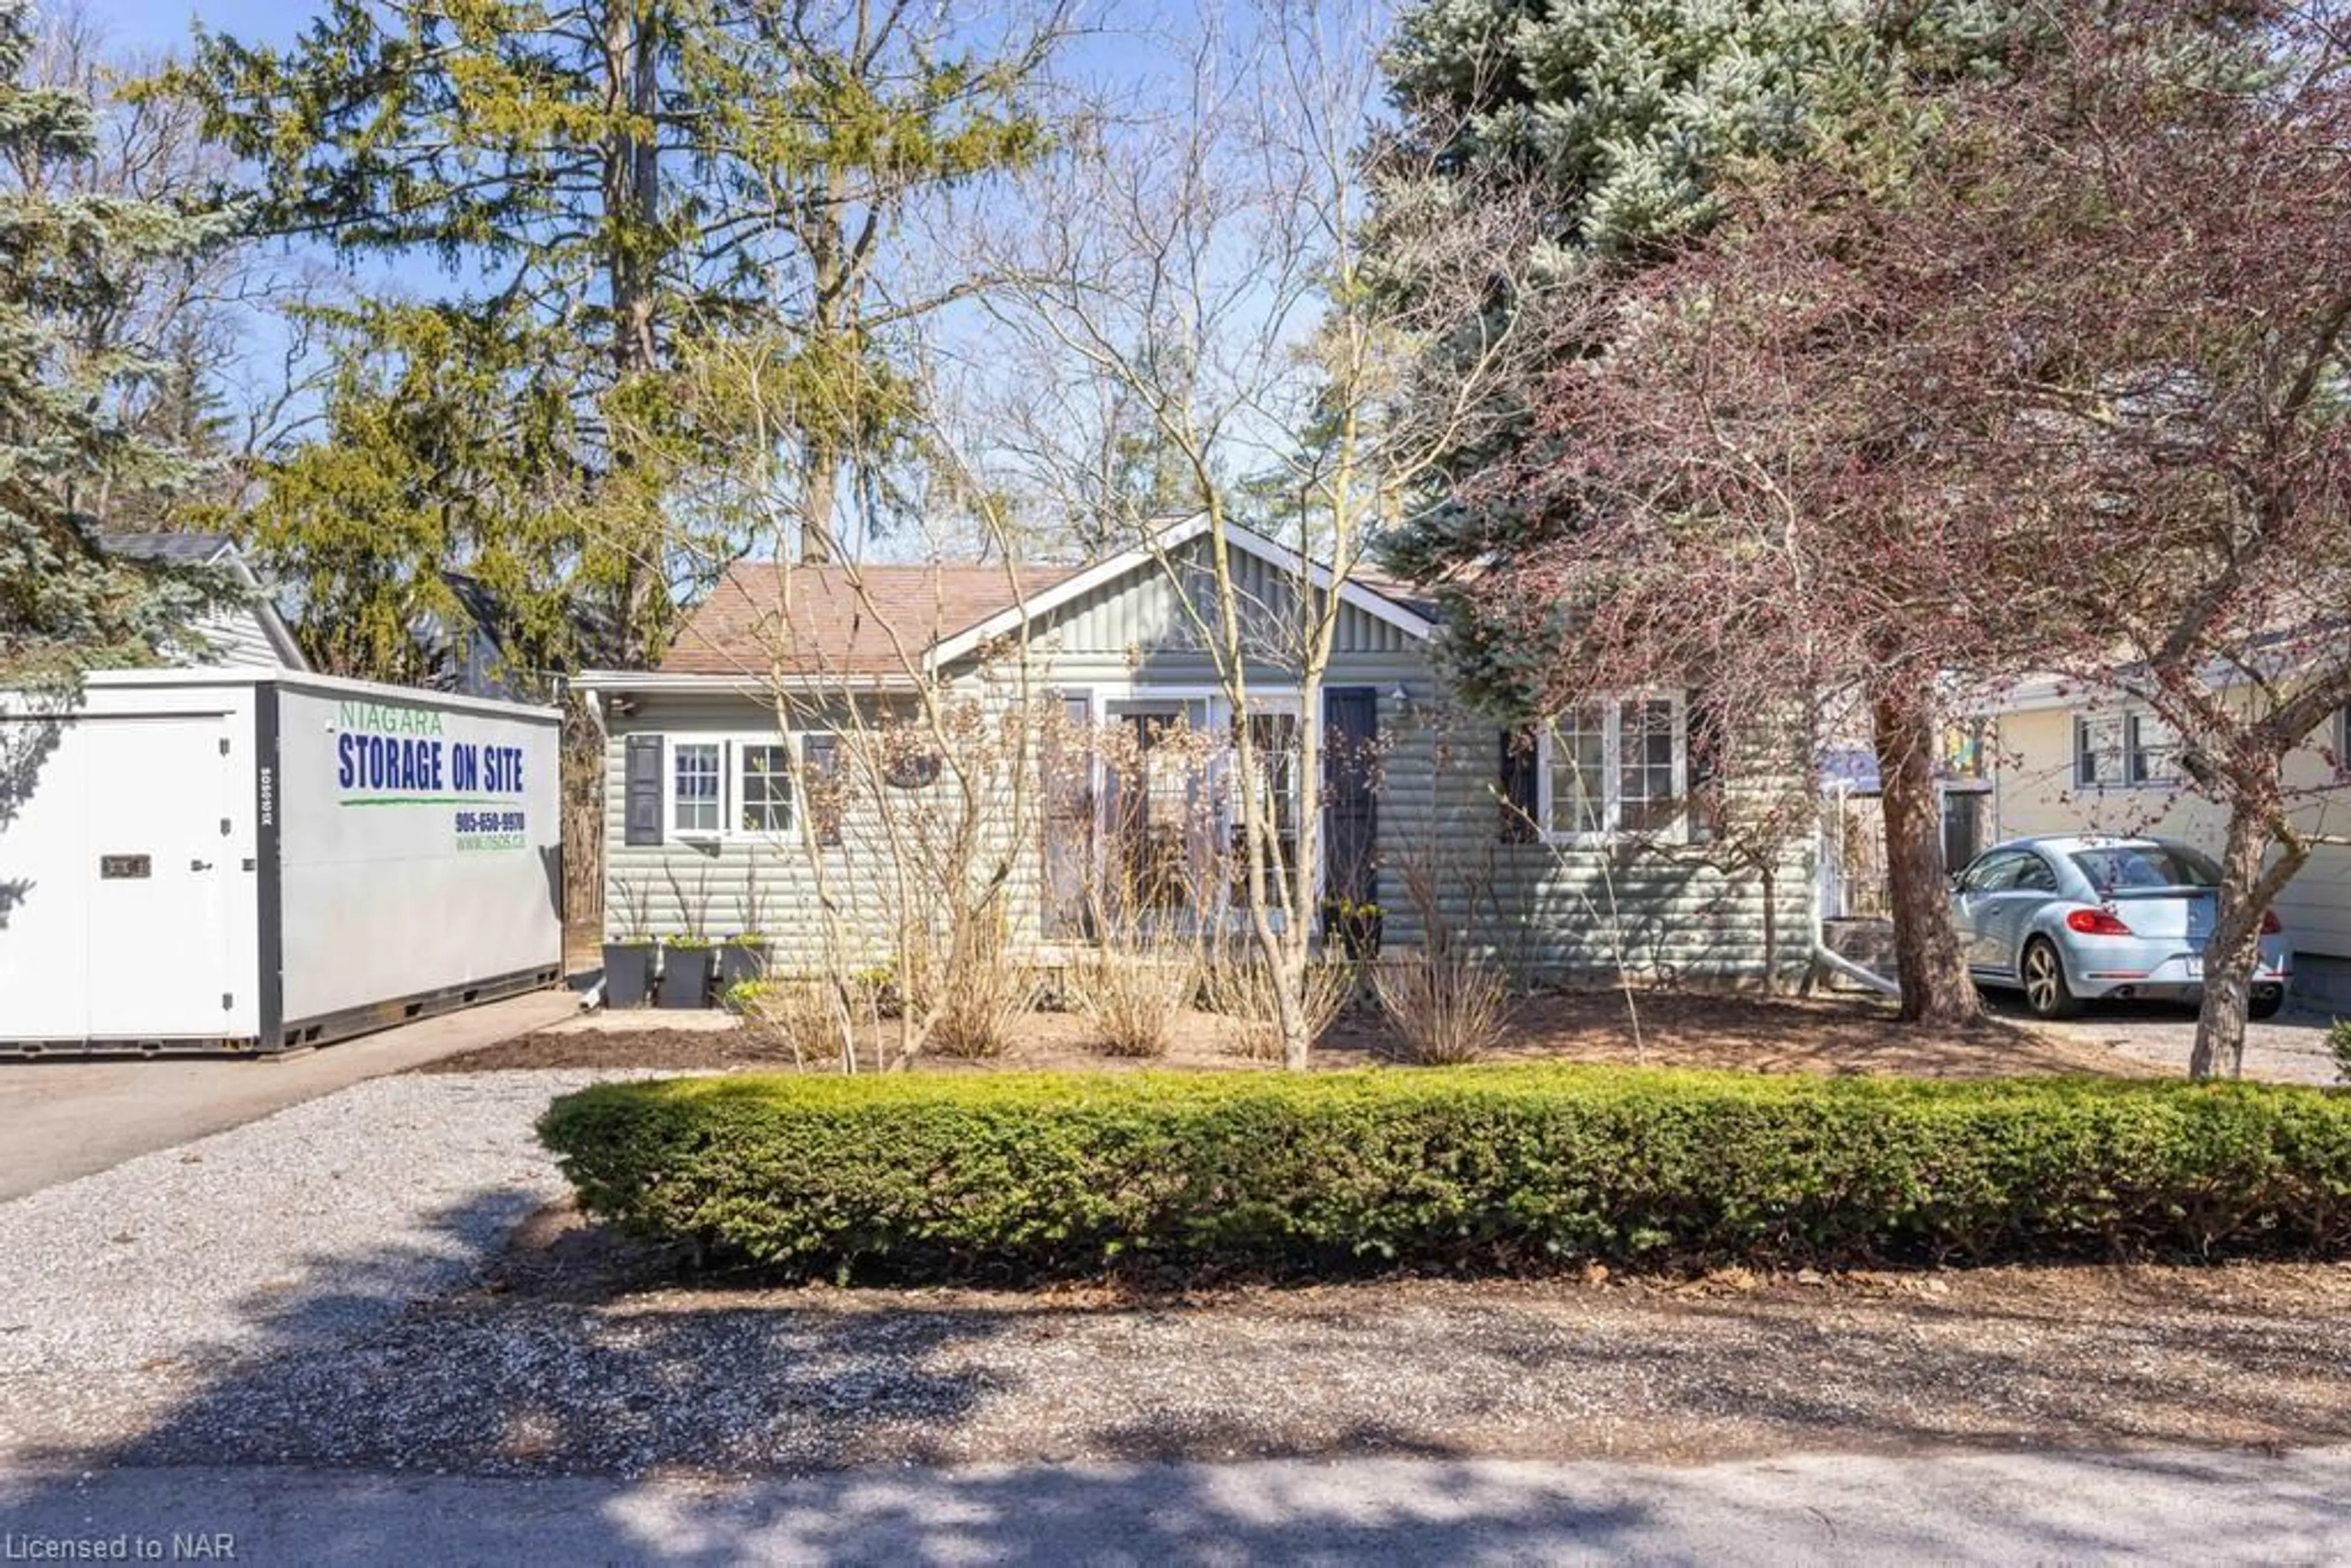 Cottage for 9 Addison Ave, Niagara-on-the-Lake Ontario L0S 1J0